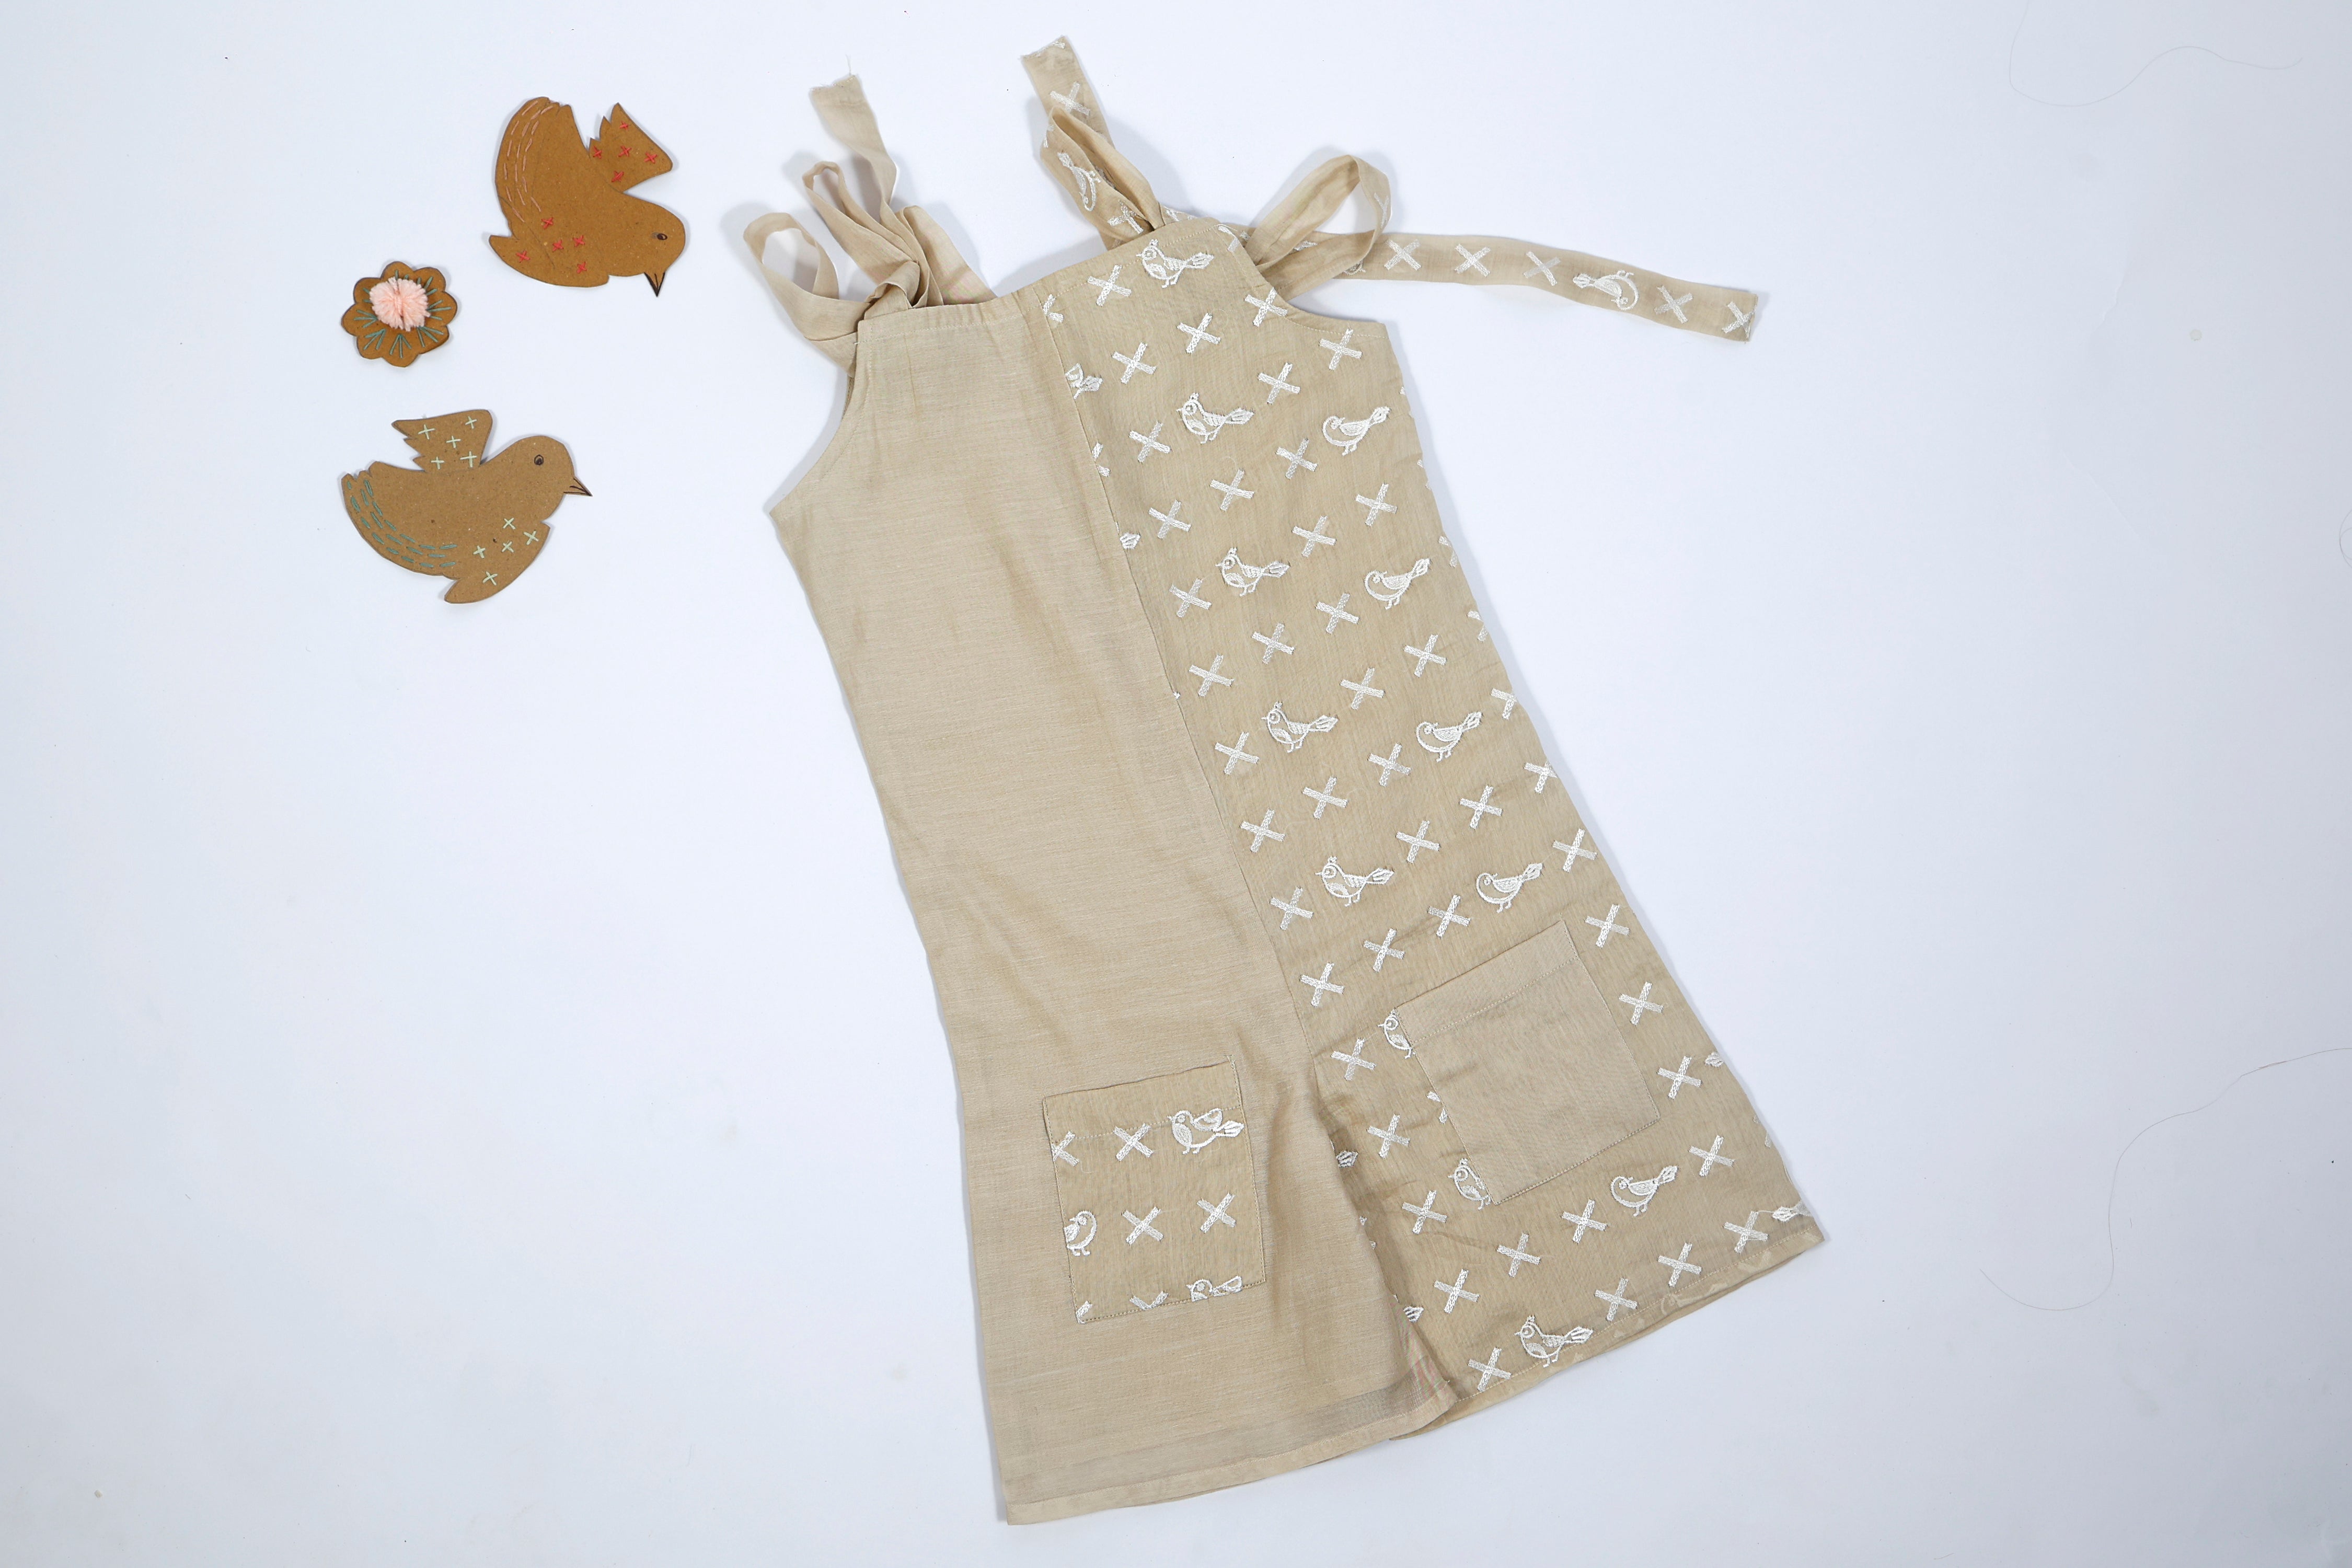 The Feathered Friend Jumpsuit for Kids